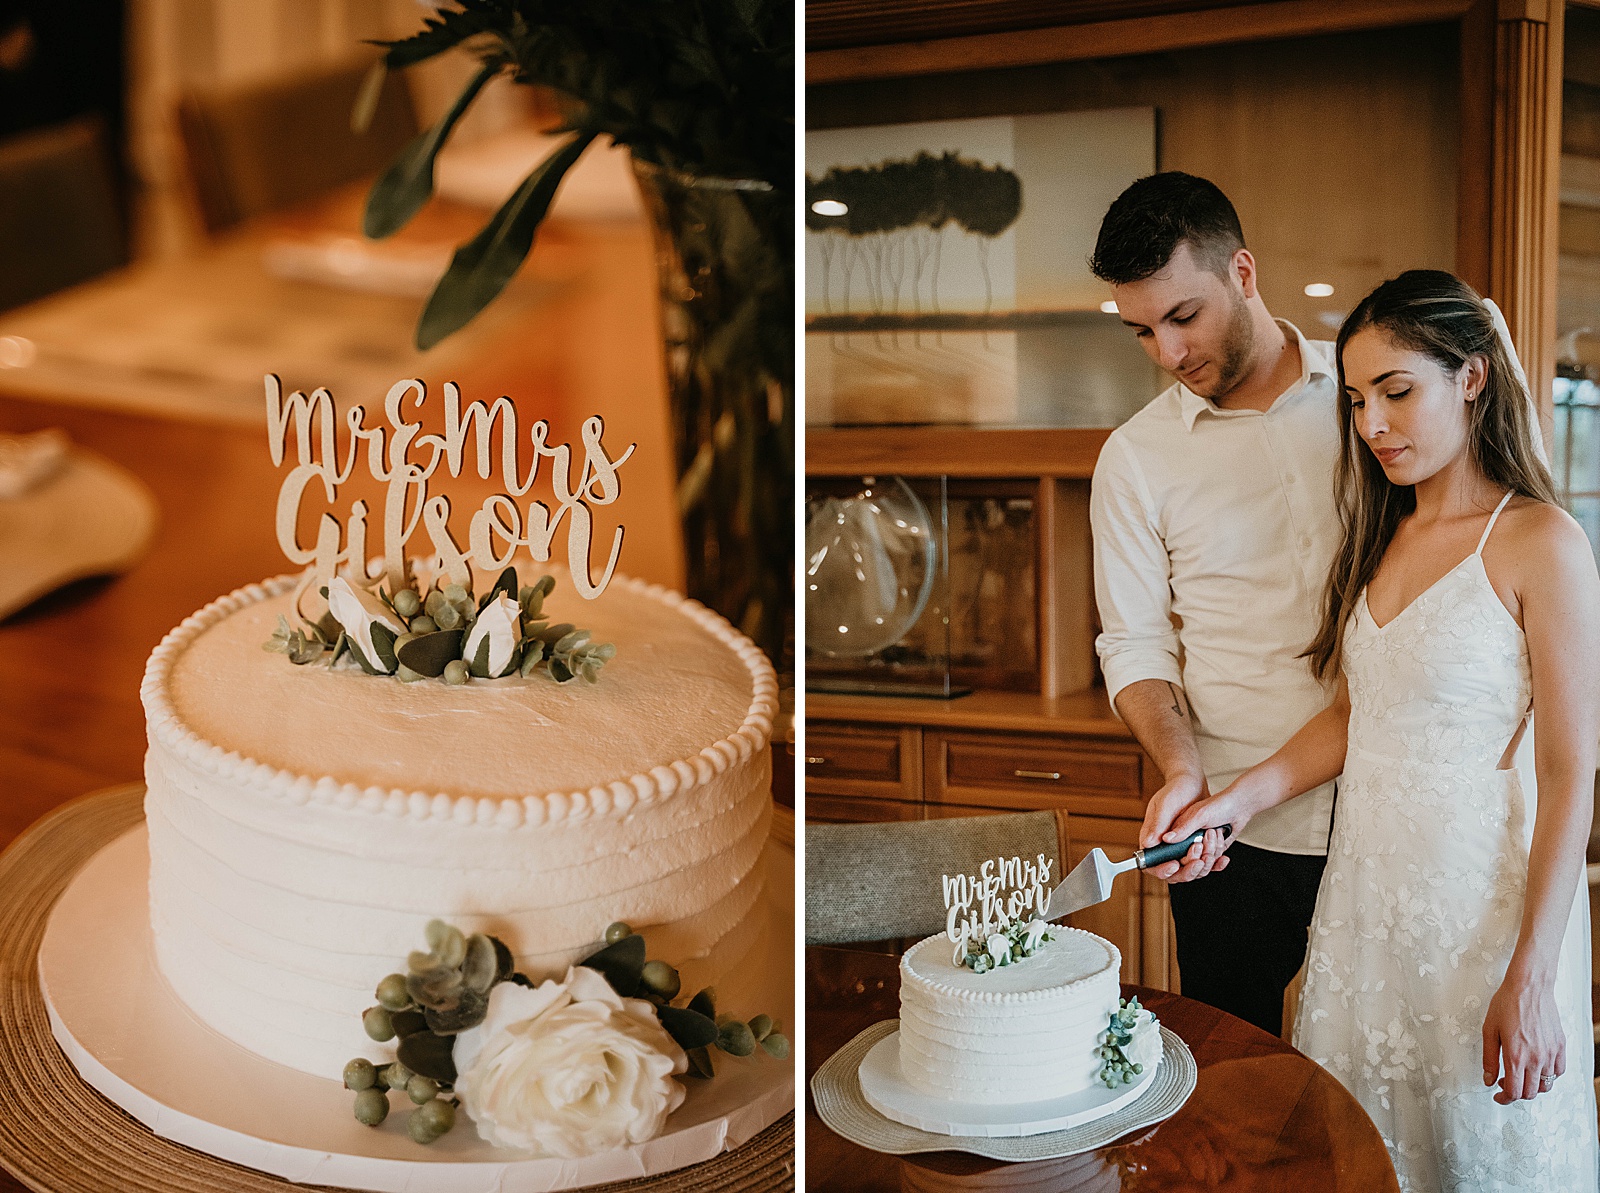 Intimate Fort Lauderdale Elopement Bride and Groom cutting cake captured by South Florida Elopement Photographer, Krystal Capone Photography